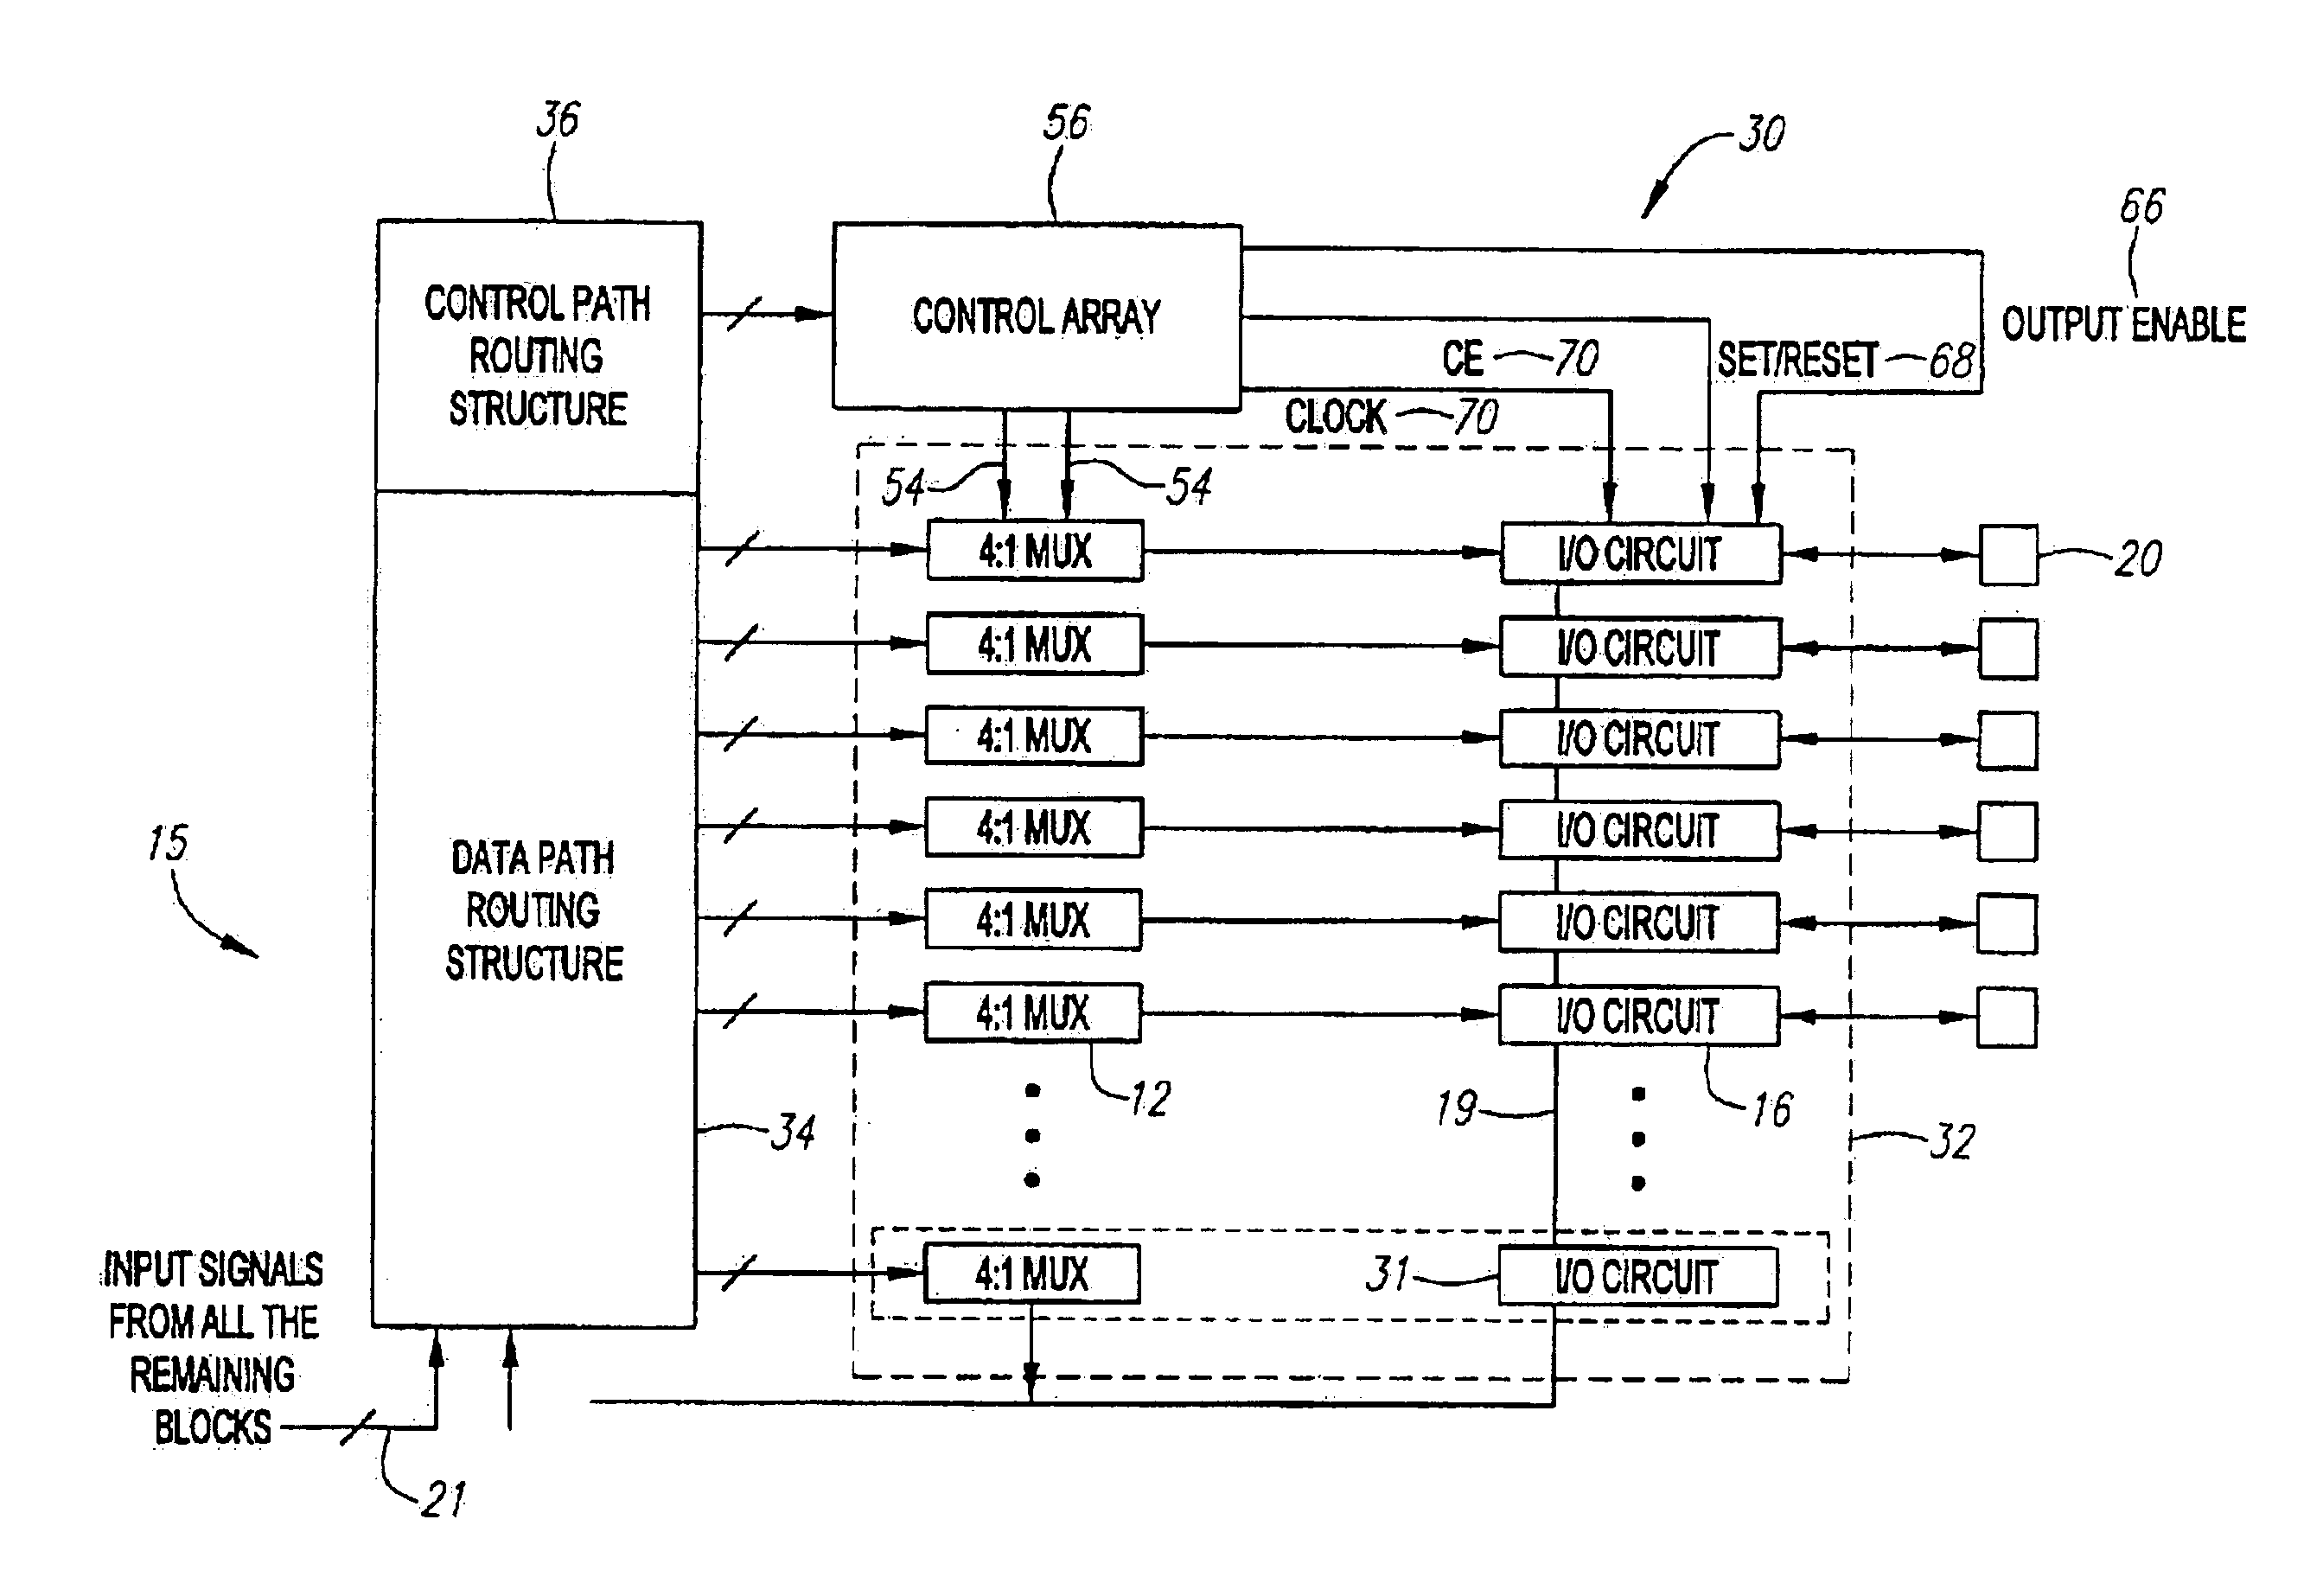 High speed interface for a programmable interconnect circuit